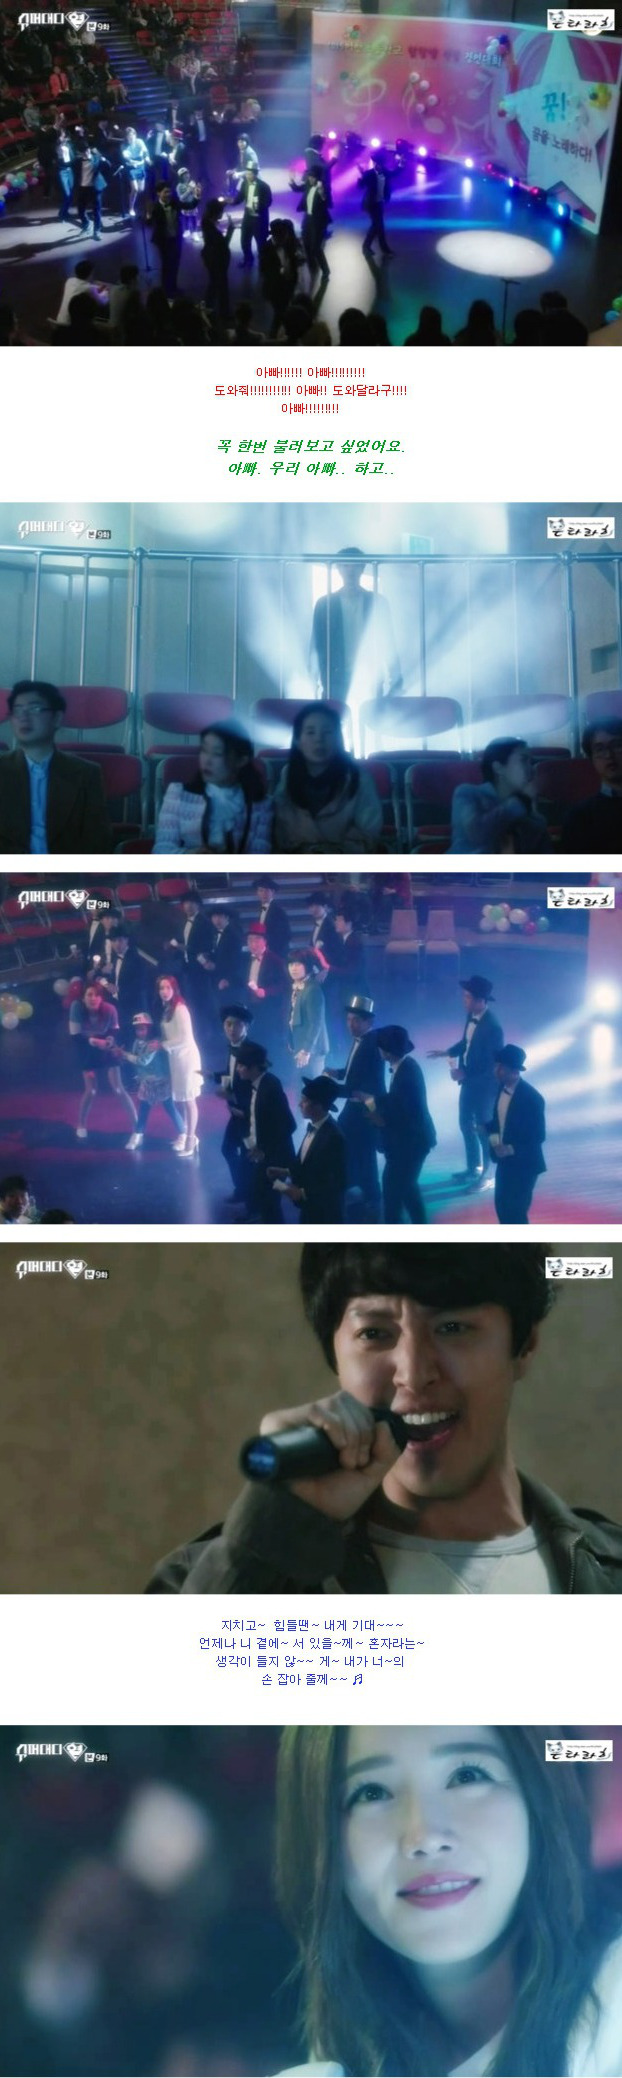 episodes 9 and 10 captures for the Korean drama 'Super Daddy Yeol'